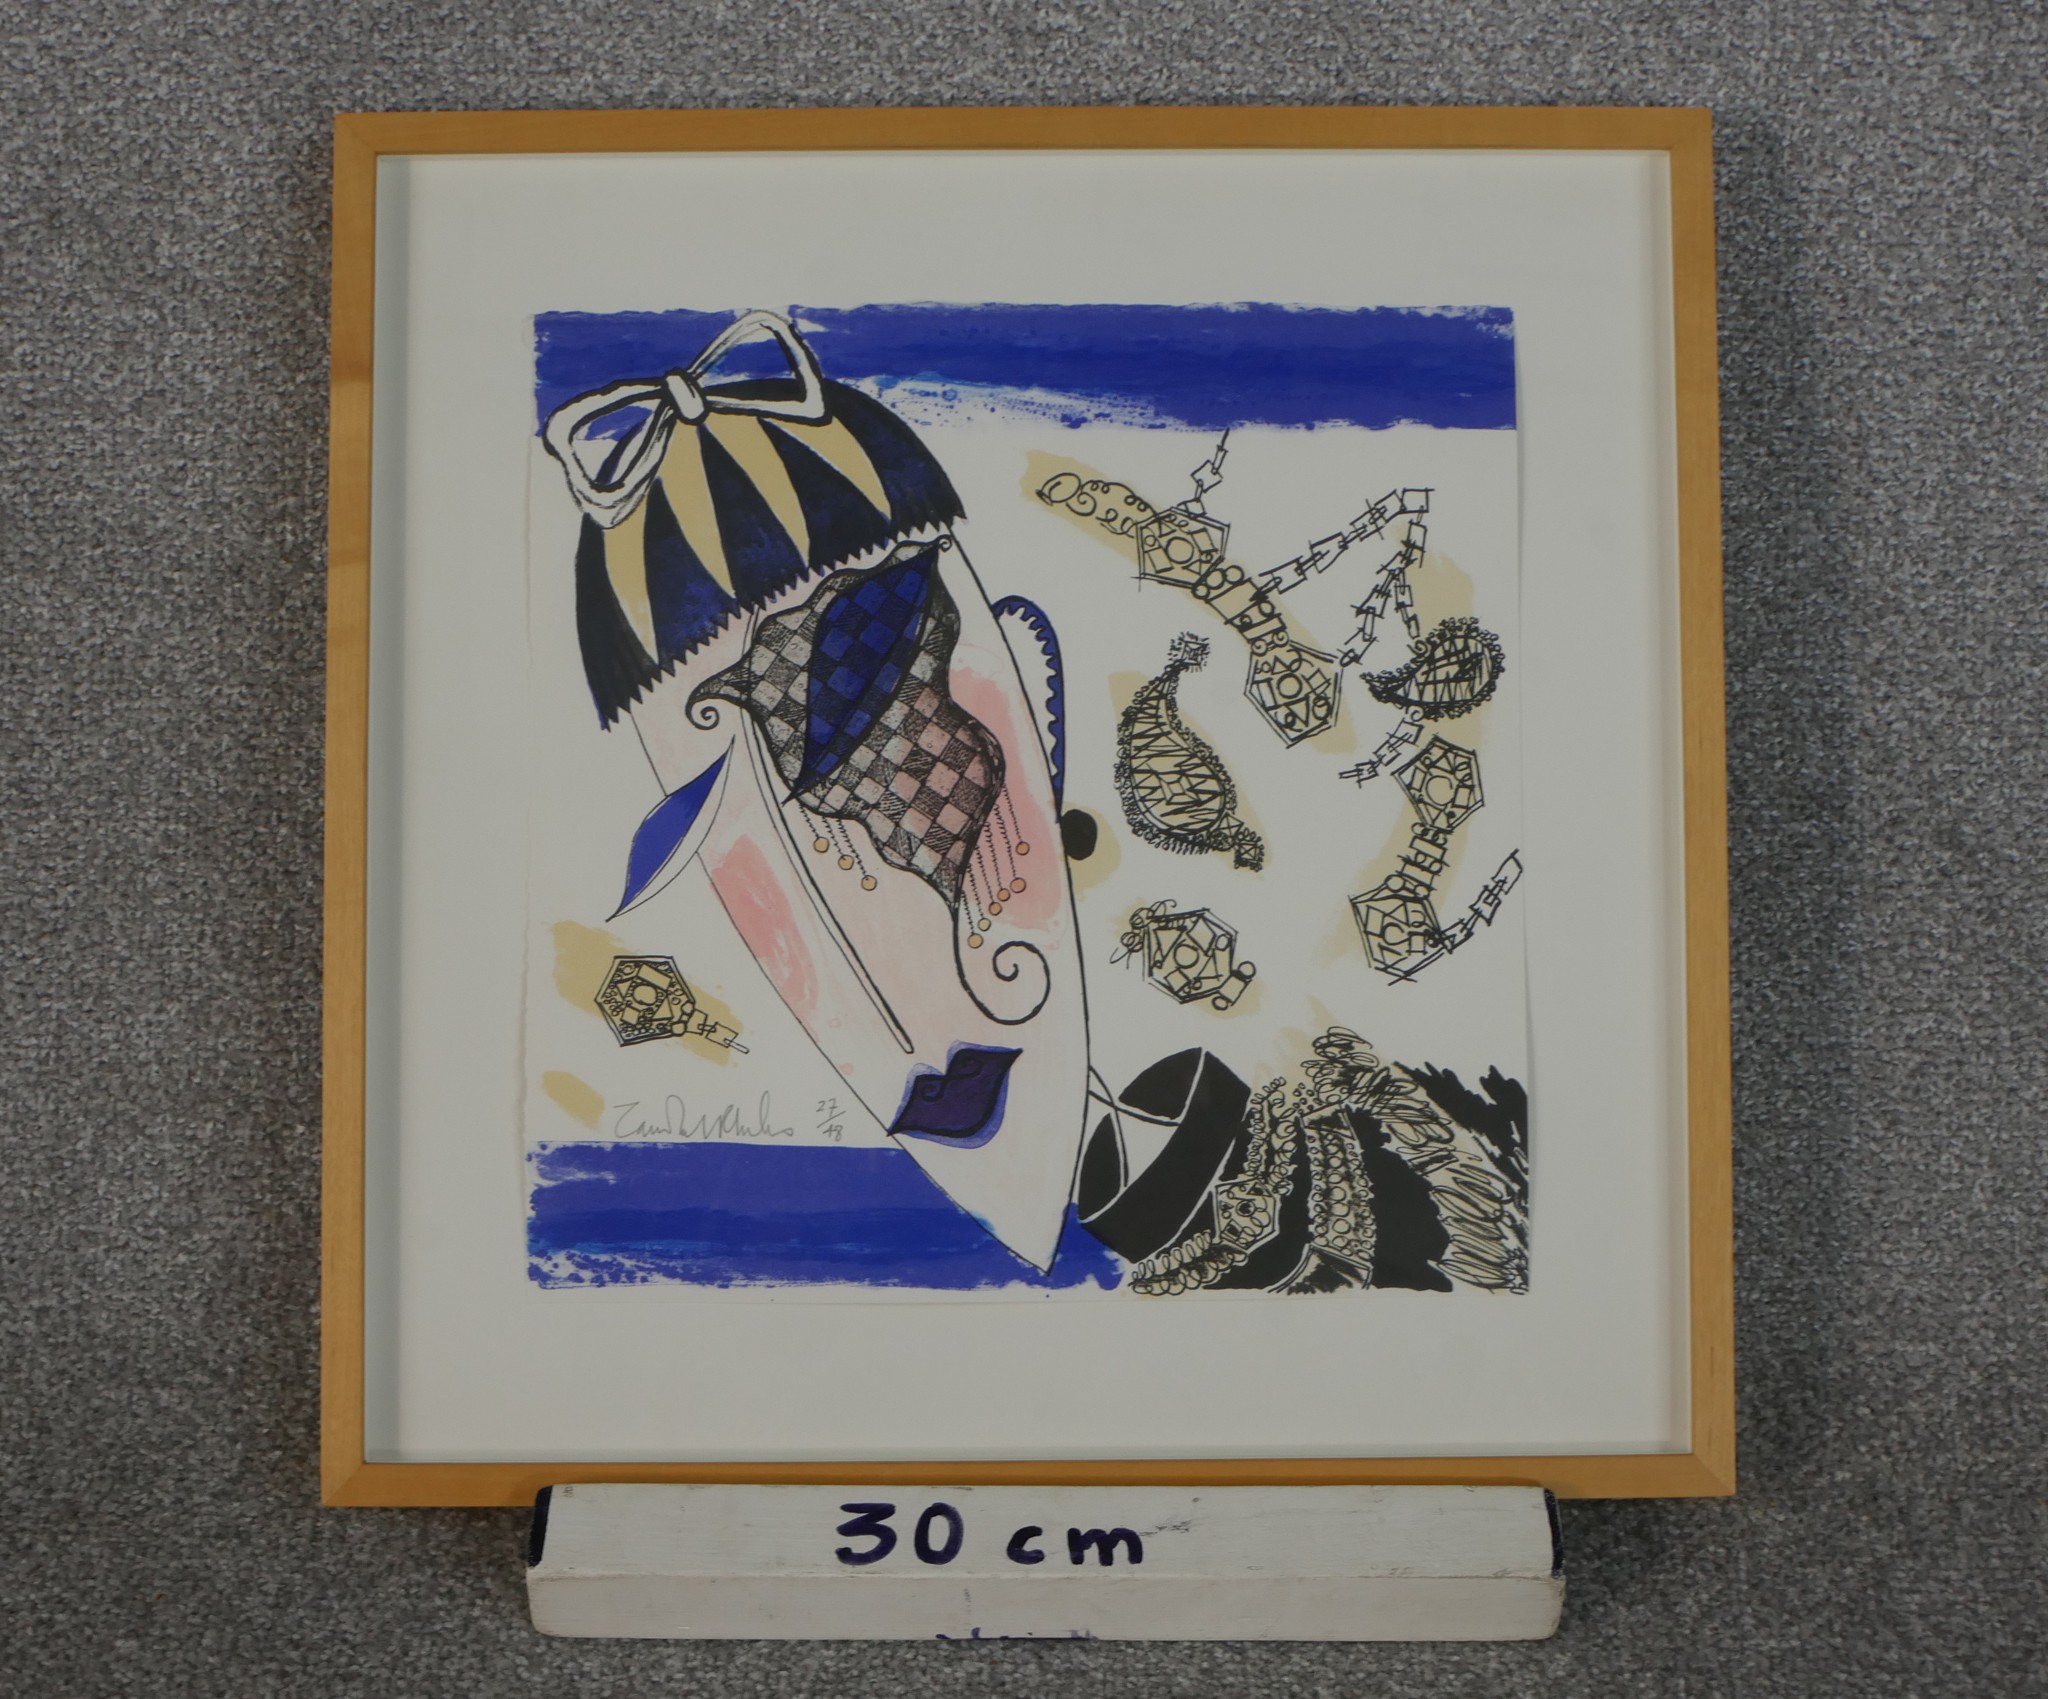 Zandra Rhodes, Head With Scribbled Jewels (from the Portfolio 'Artists Choice' 1987), 1987 - Image 3 of 5